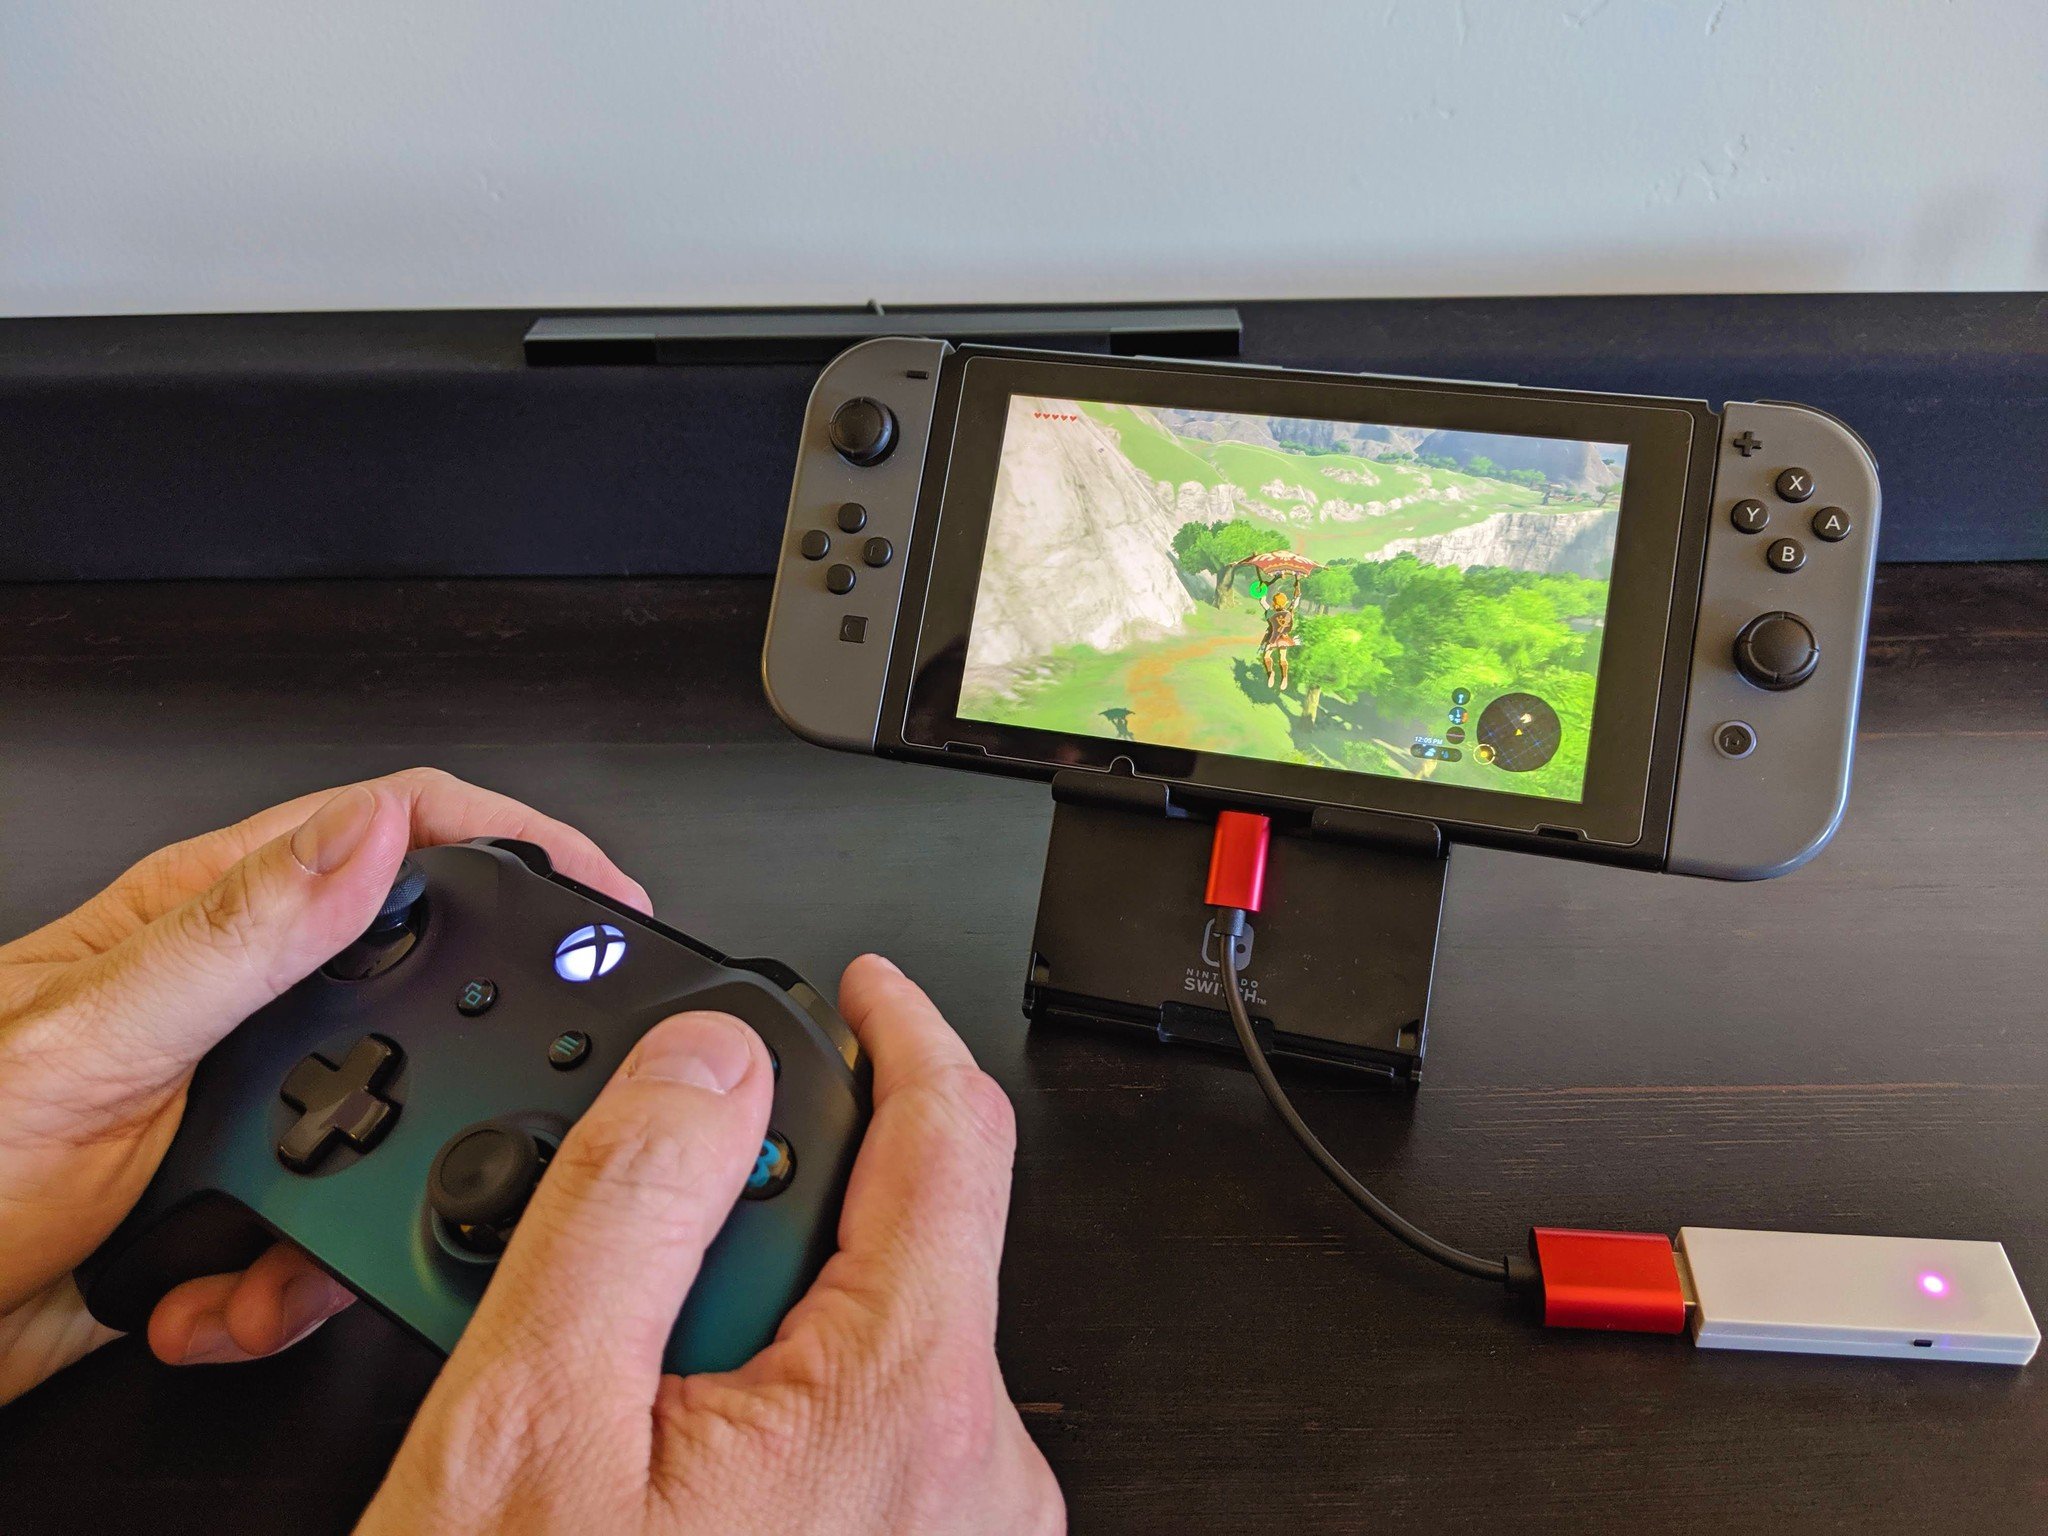 How to connect your Xbox One controller with the Nintendo Switch in wireless tabletop mode step nine: Enjoy wireless tabletop mode